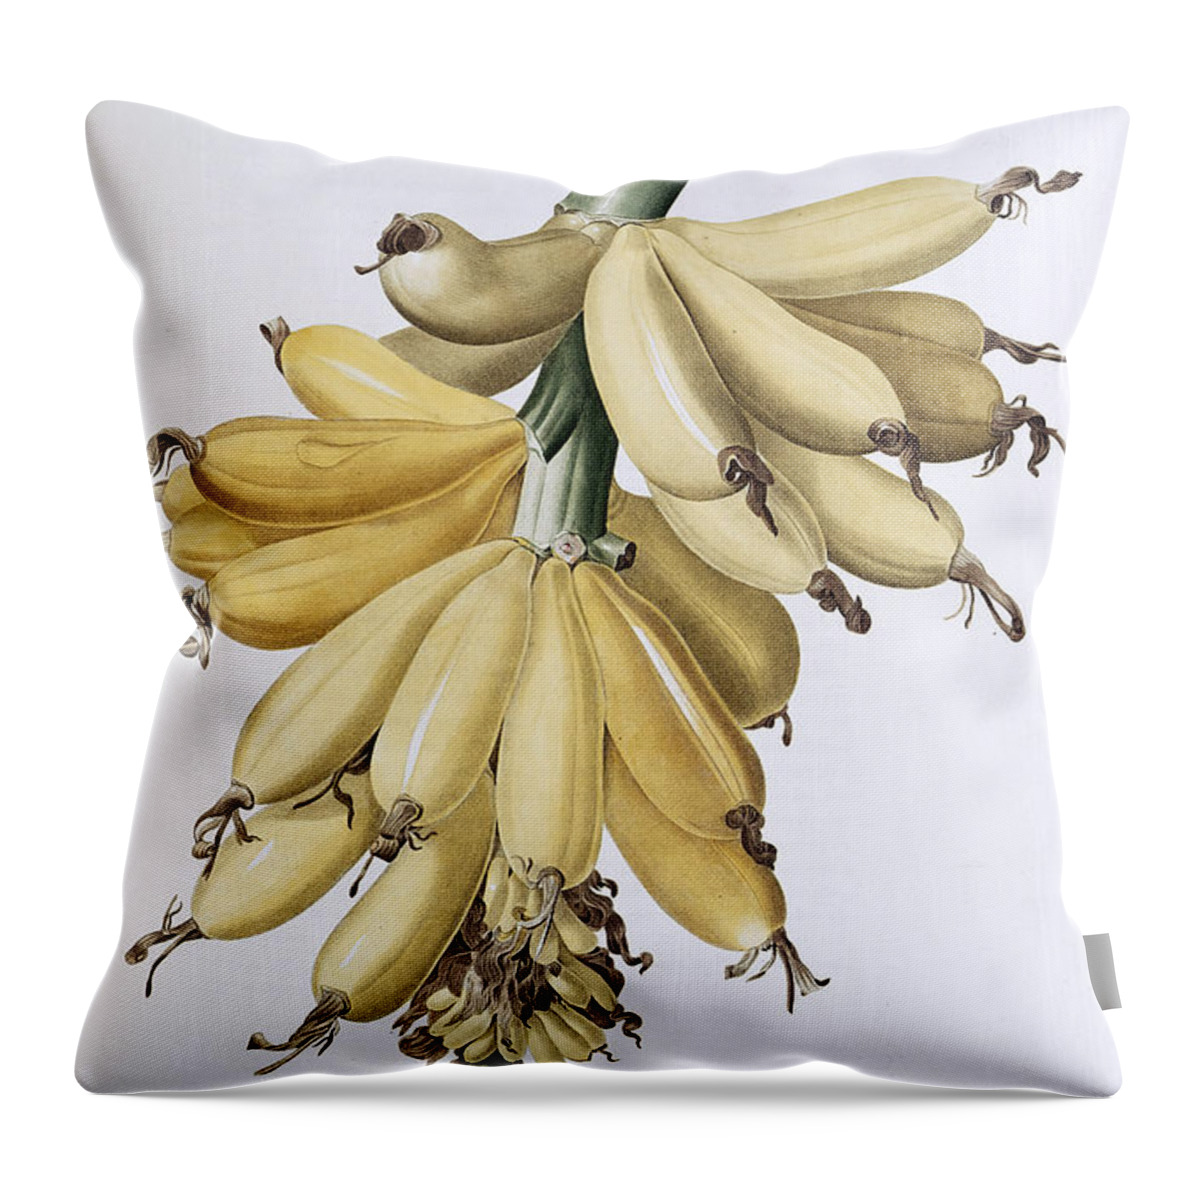 Banana Throw Pillow featuring the painting Banana by Pierre Joseph Redoute